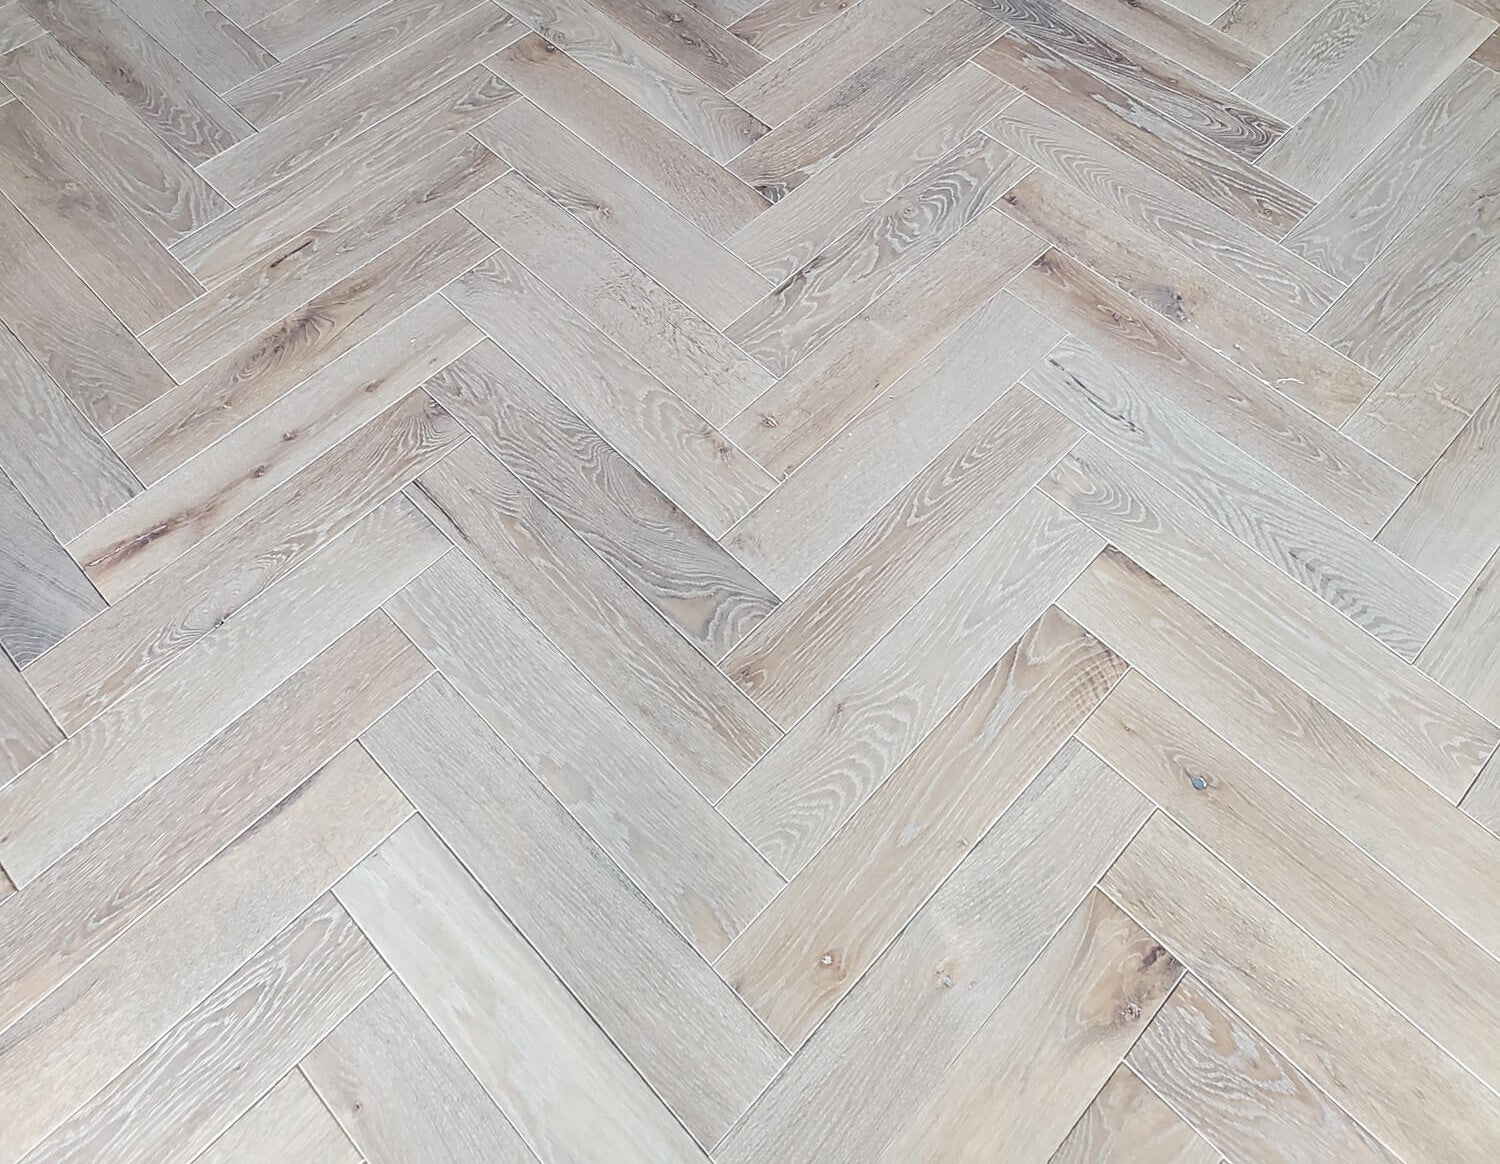 Light colored, cerused white oak wood flooring finished with Rubio Monocoat Products.